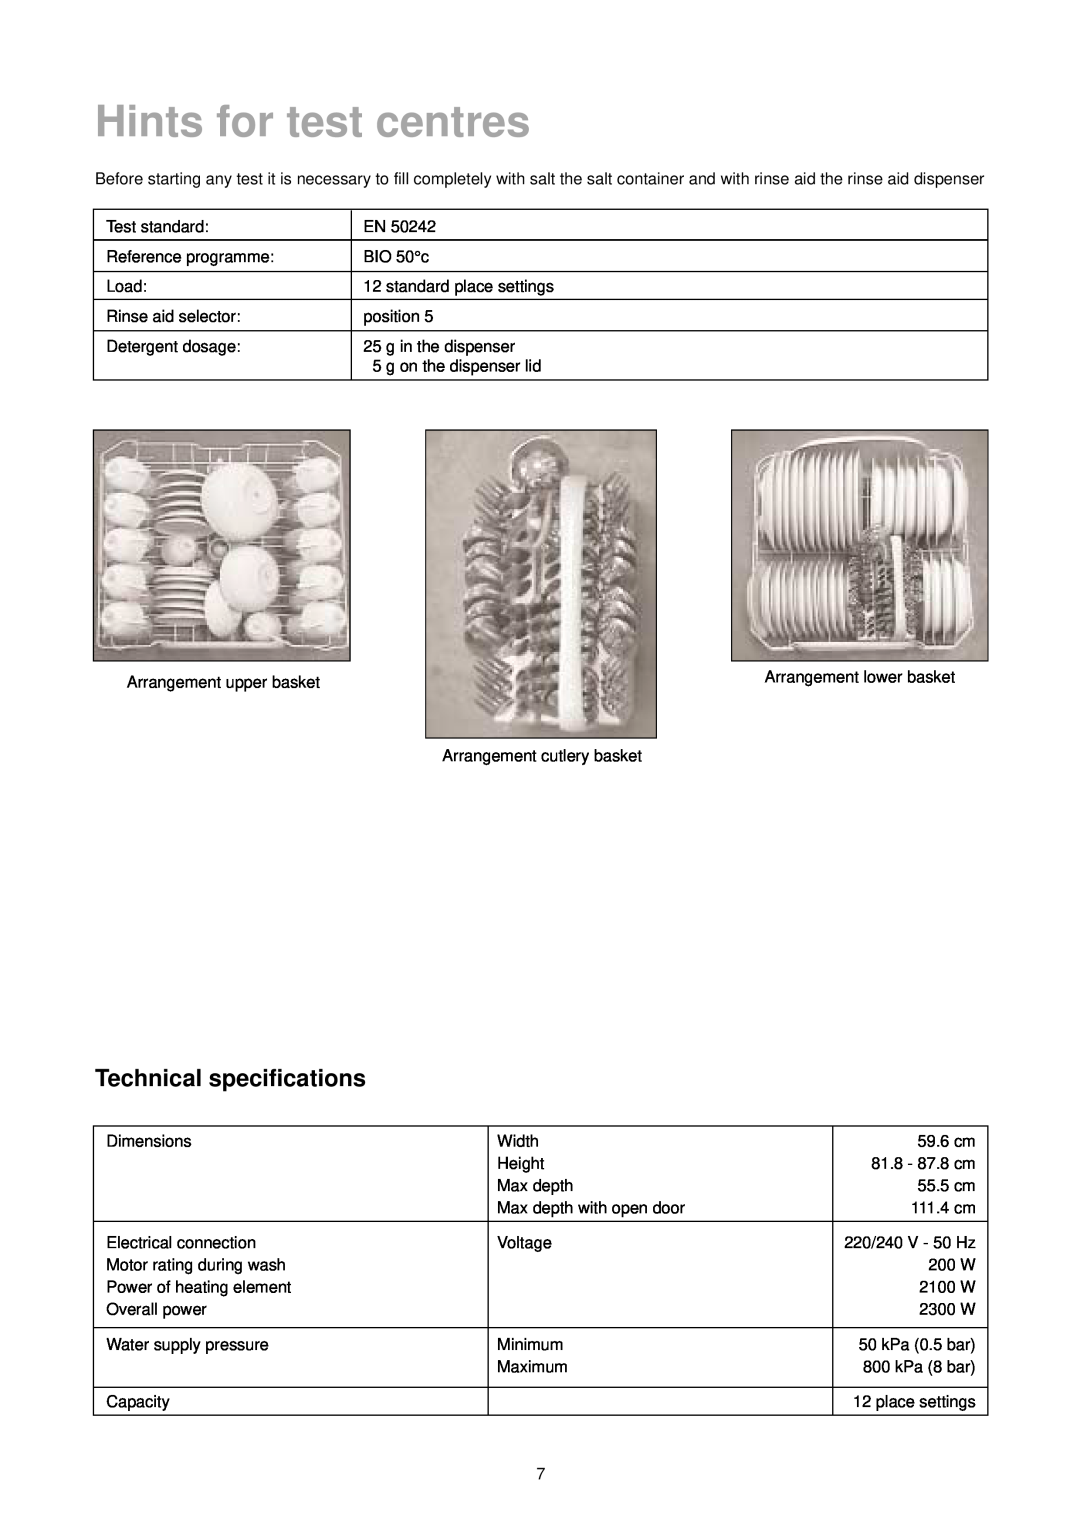 Zanussi ZT 695 manual Hints for test centres, Technical specifications 